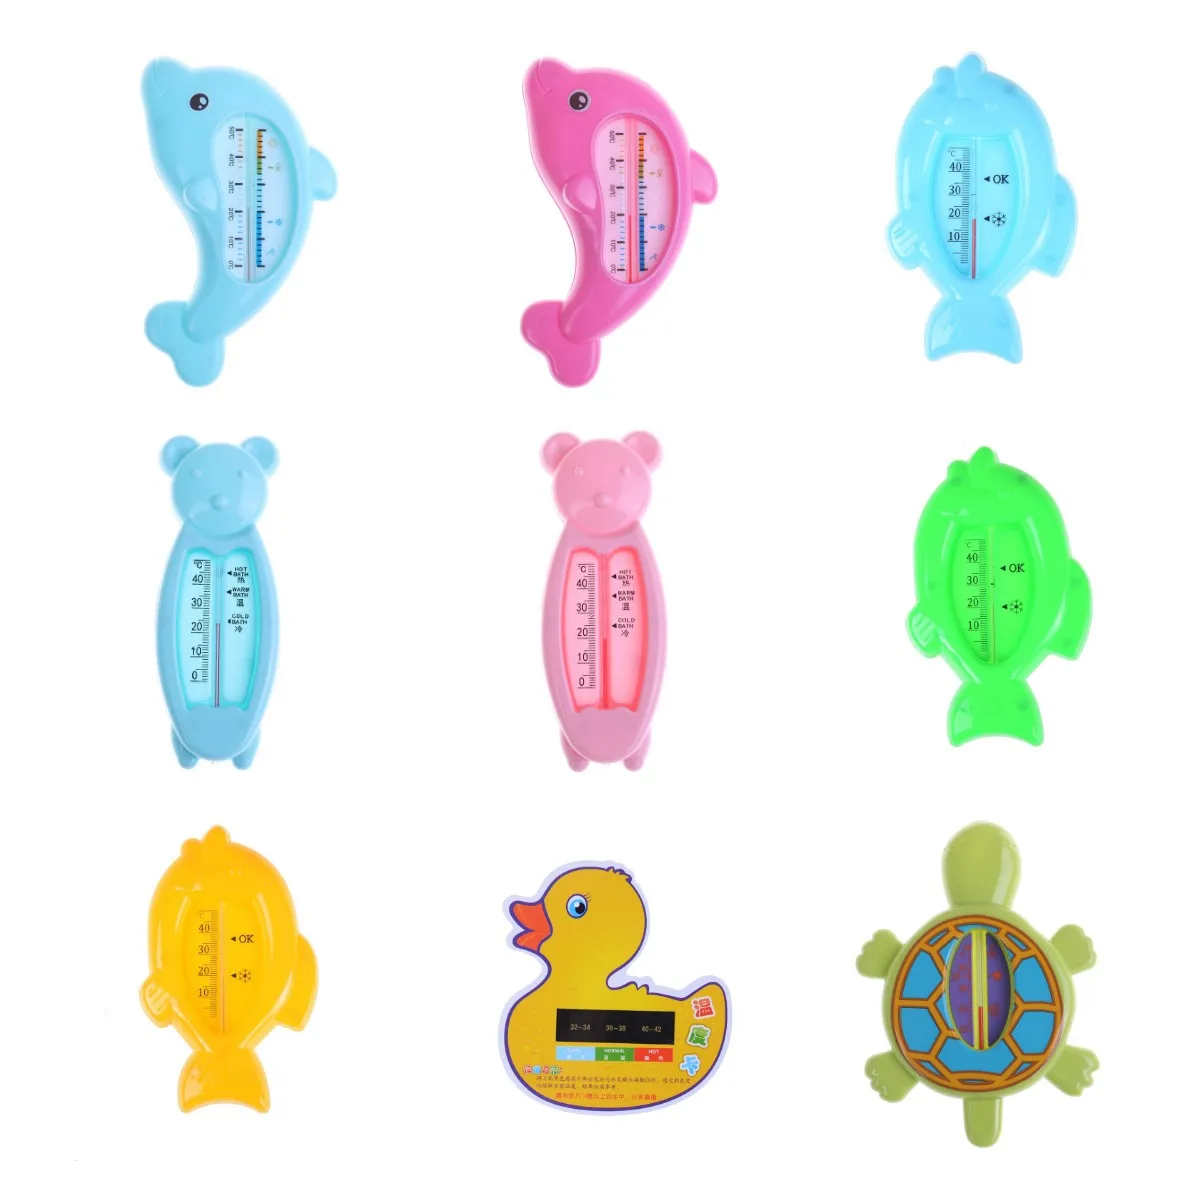 baby-bath-thermometer-for-newborn-small-bear-fish-dolphin-duck-water-temperature-meter-bath-baby-bath-toys-thermometer-bath-1pc